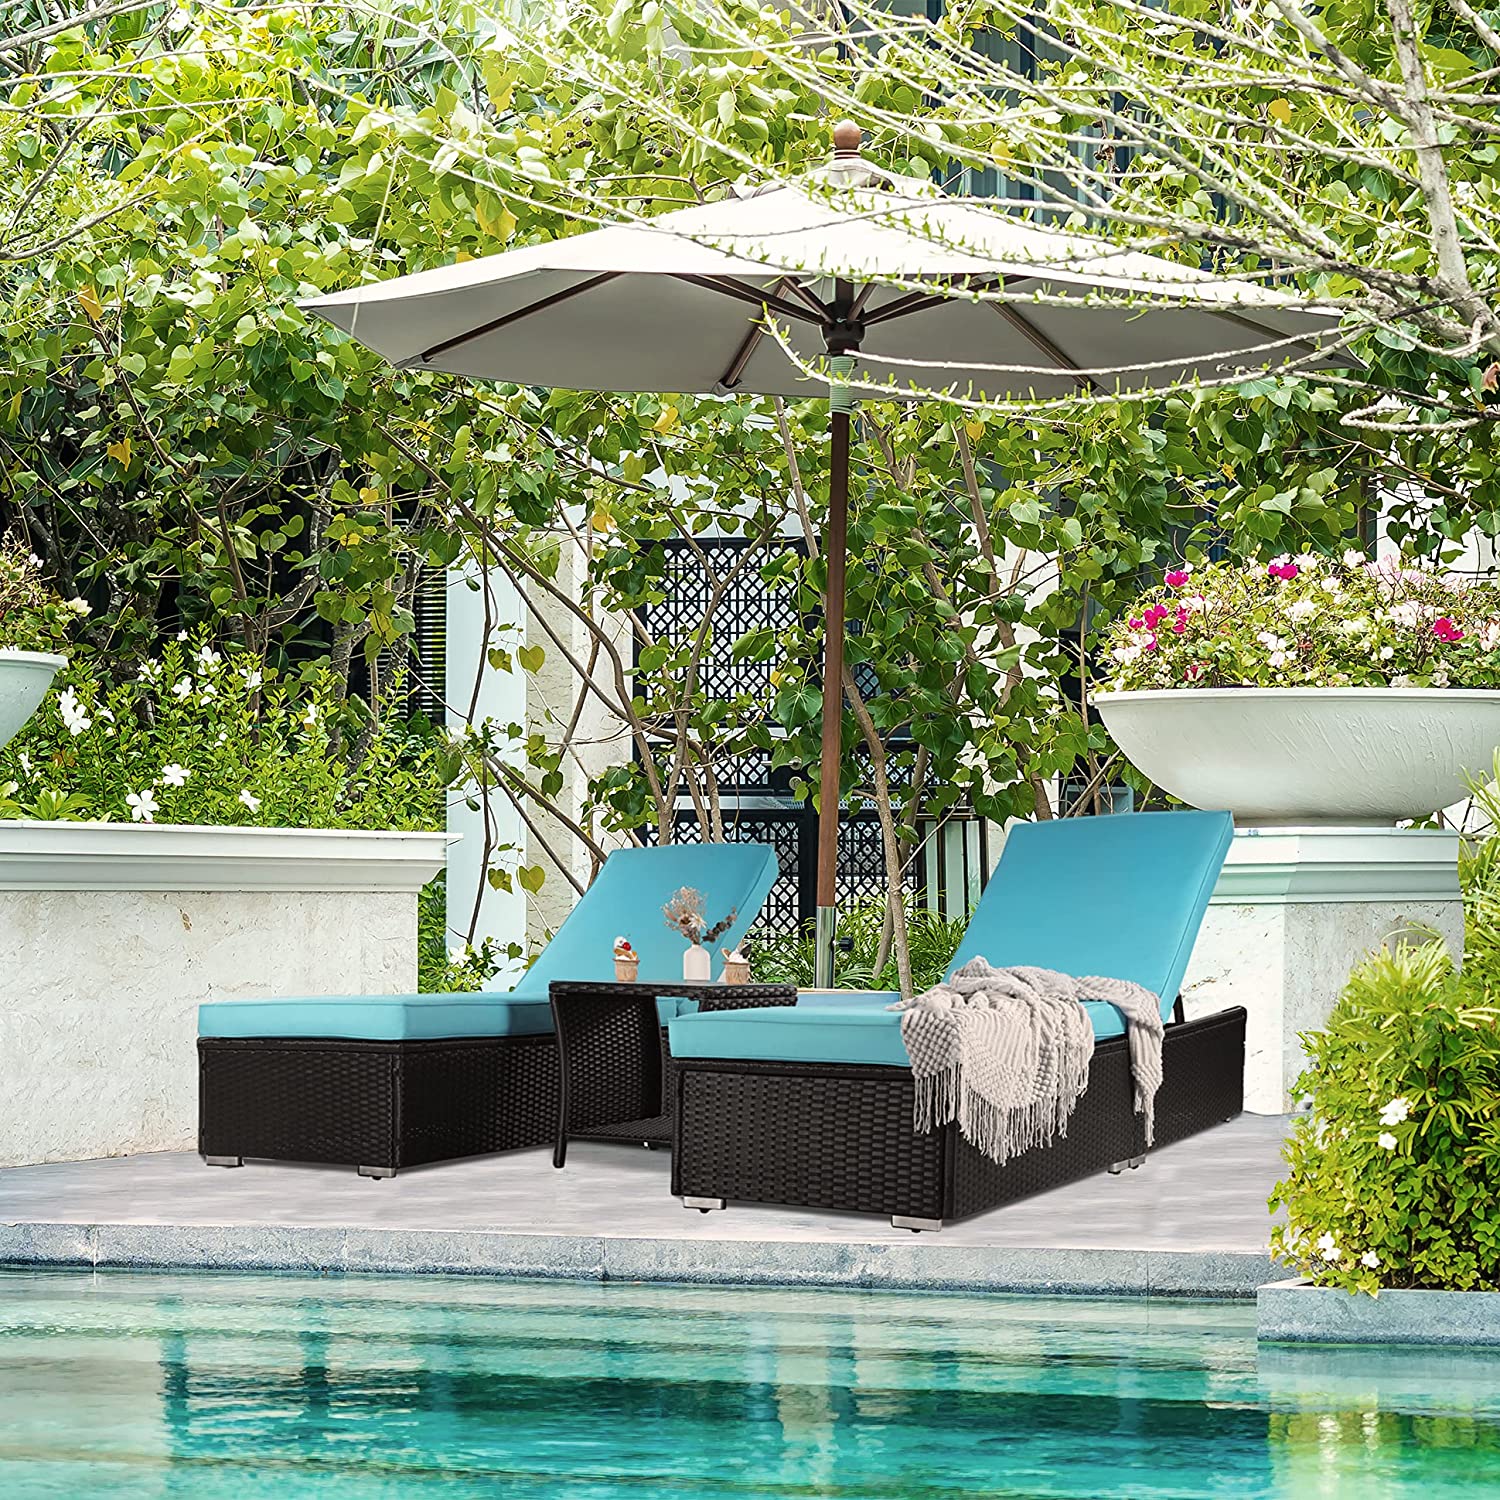 Chaise Lounge Chairs Outdoor Set of 2 with Patio Side Table, 3 Piece Patio Lounge Chair Set Wicker Adjustable Reclining Chairs and End Table for Pool with Removable Cushion, Blue - image 1 of 7